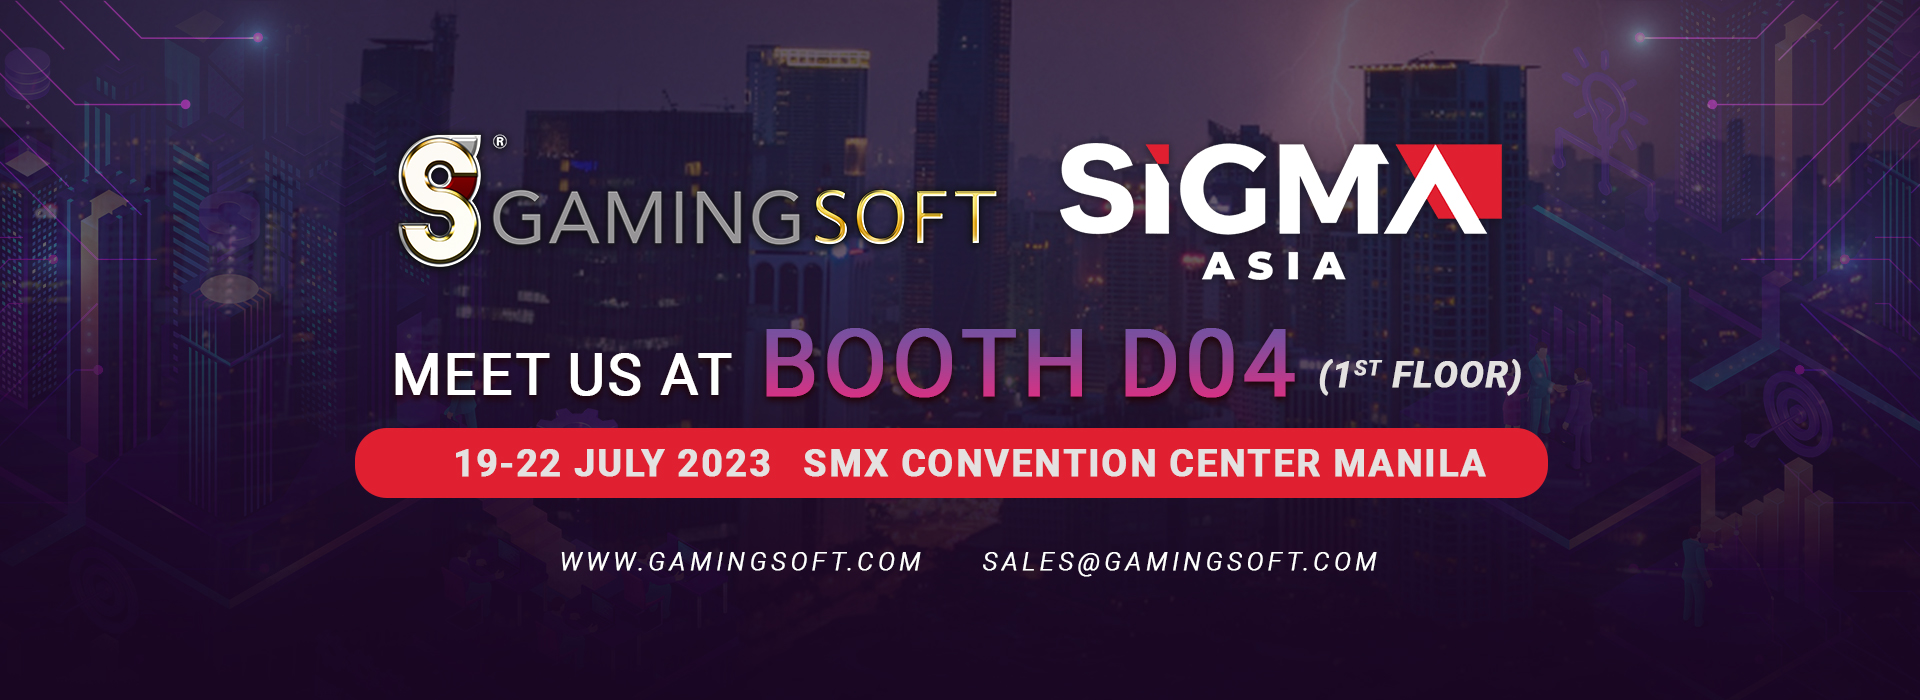 Sigma Asia  Meet us at booth D04 SMX Convention Center Manila Web Banner - GamingSoft